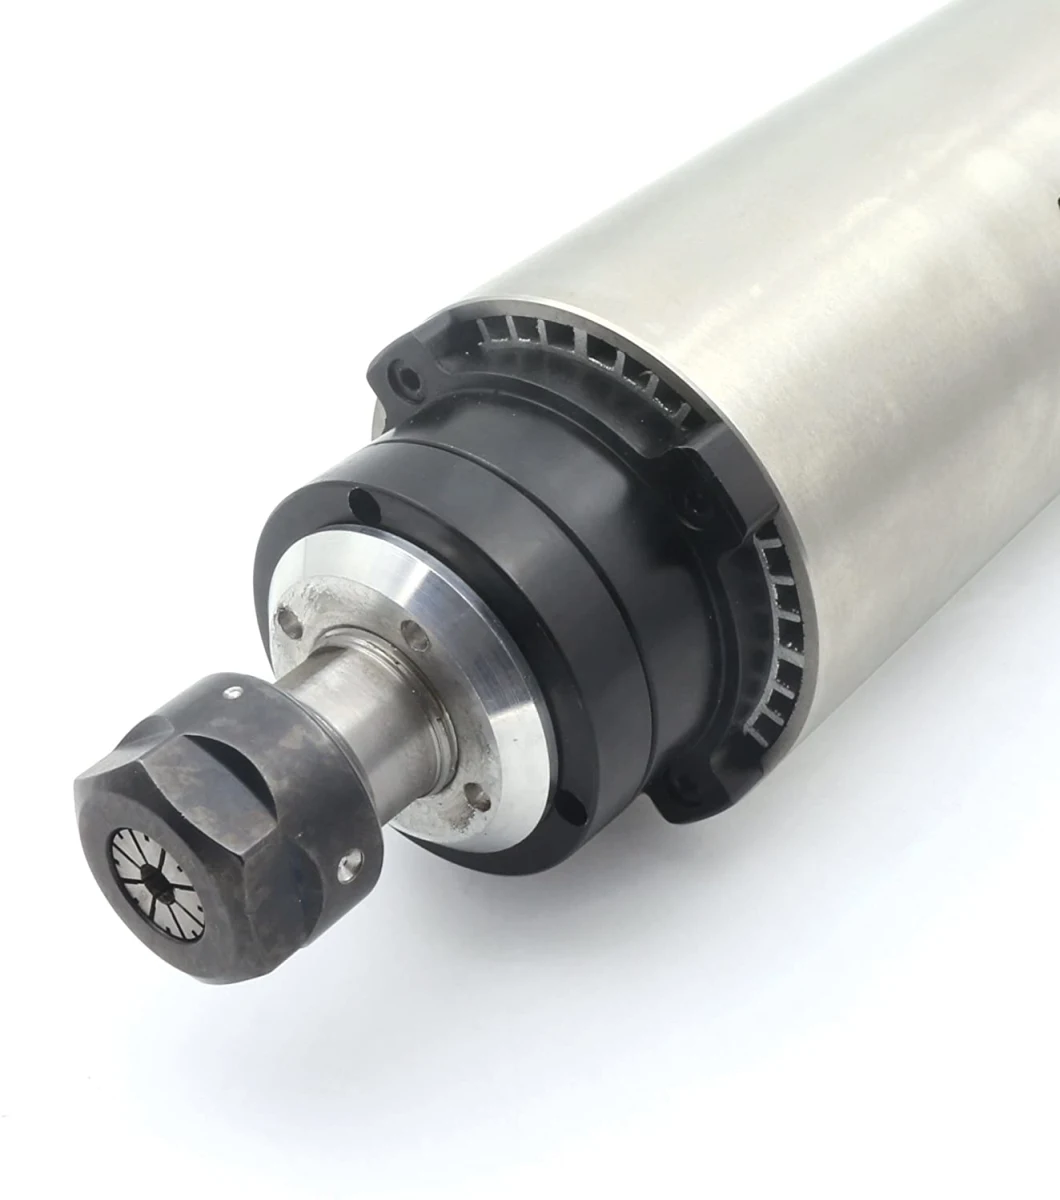 Olearn 2.2kw Spindle Water Cooling 24000rpm Machine Spindle Motor Engraving Milling Spindle 220V AC Spindle 4 Bearing